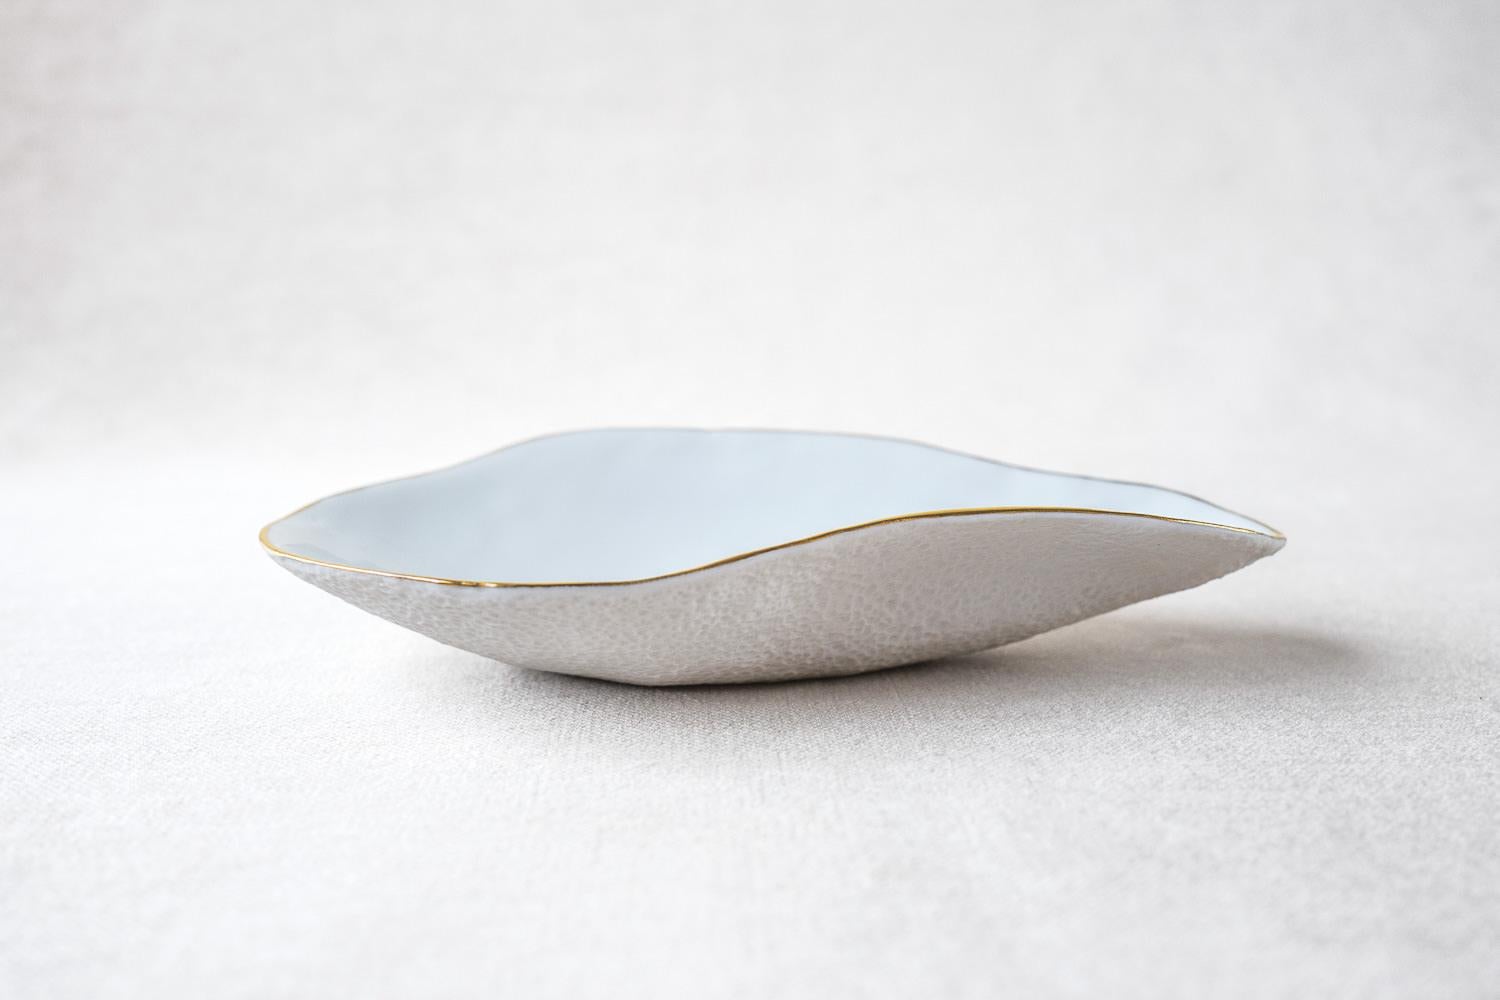 • set of 2 small porcelain side dishes
• measures 16cm x 8,5cm x 3cm
• perfect for a sexy amuse-bouche, a pre-dessert or side dish
• for that sexy dinner party
• white glazed top 
• with a very luxurious 24k hand painted golden rim
• unglazed